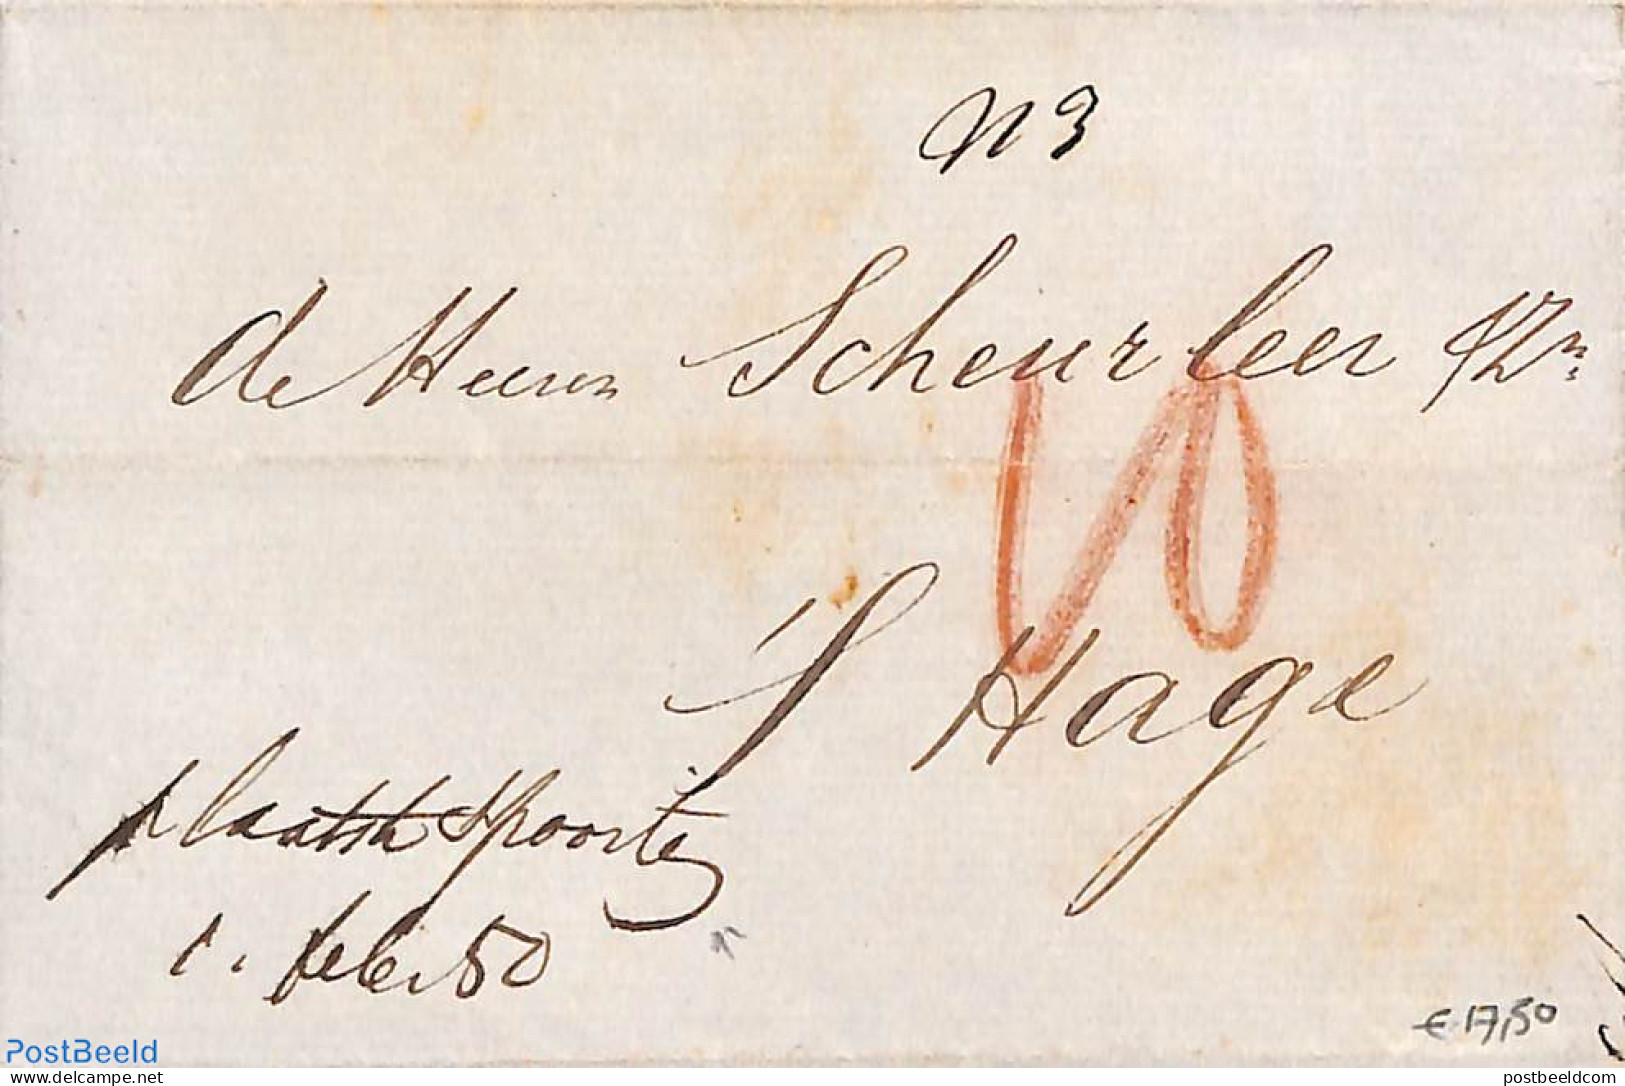 Netherlands 1880 Folding Letter From Amsterdam To The Hague, Postal History - Briefe U. Dokumente